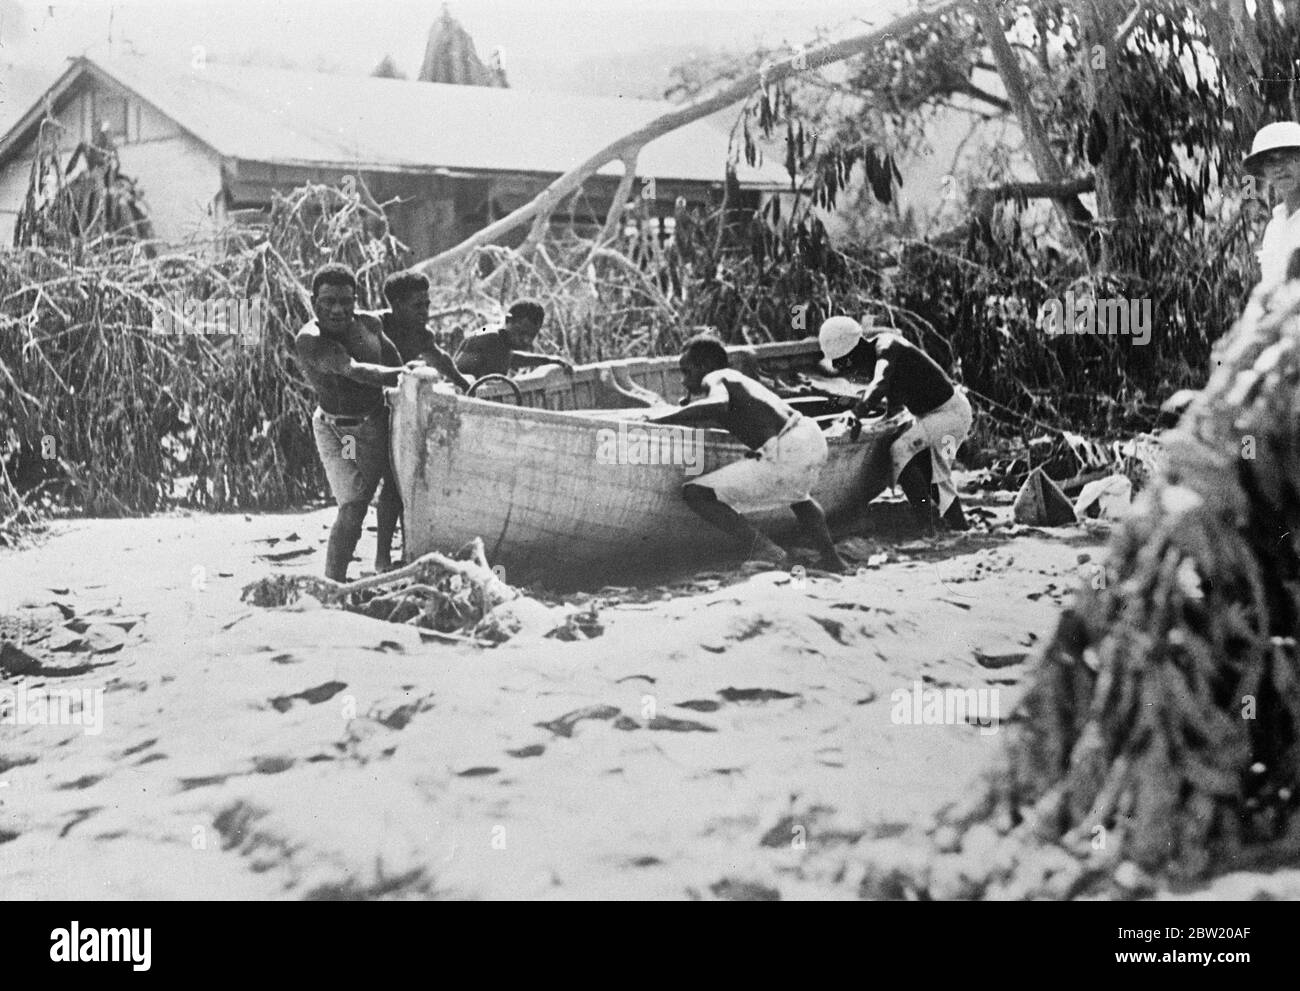 First pictures of volcano disaster on New Guinea island. Three volcanoes, 2 on Vulcan Island and one on the Matupi Island, erupted violently showering pumice and mud on the roofs of Rabaul chief town of New Britain Island in New Guinea. Photo shows: Natives at Rabaul removing boat which was carried 300 yards inshore by tidal wave [tsunami]; broken trees in the background. 18 June 1937 Stock Photo